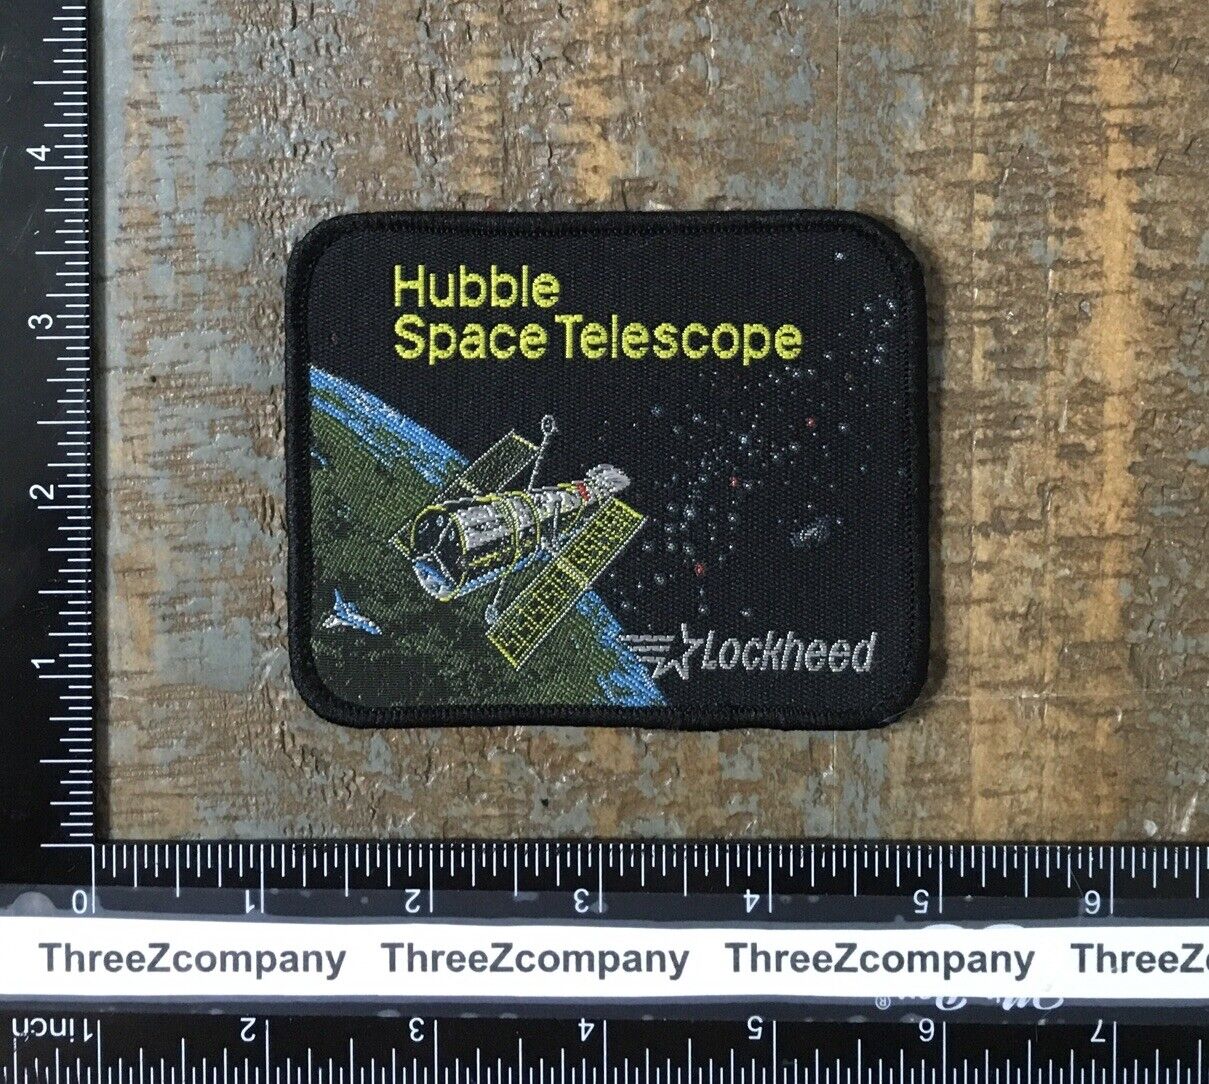 Vintage HUBBLE SPACE TELESCOPE Lockheed NASA Woven Sew-On Patch